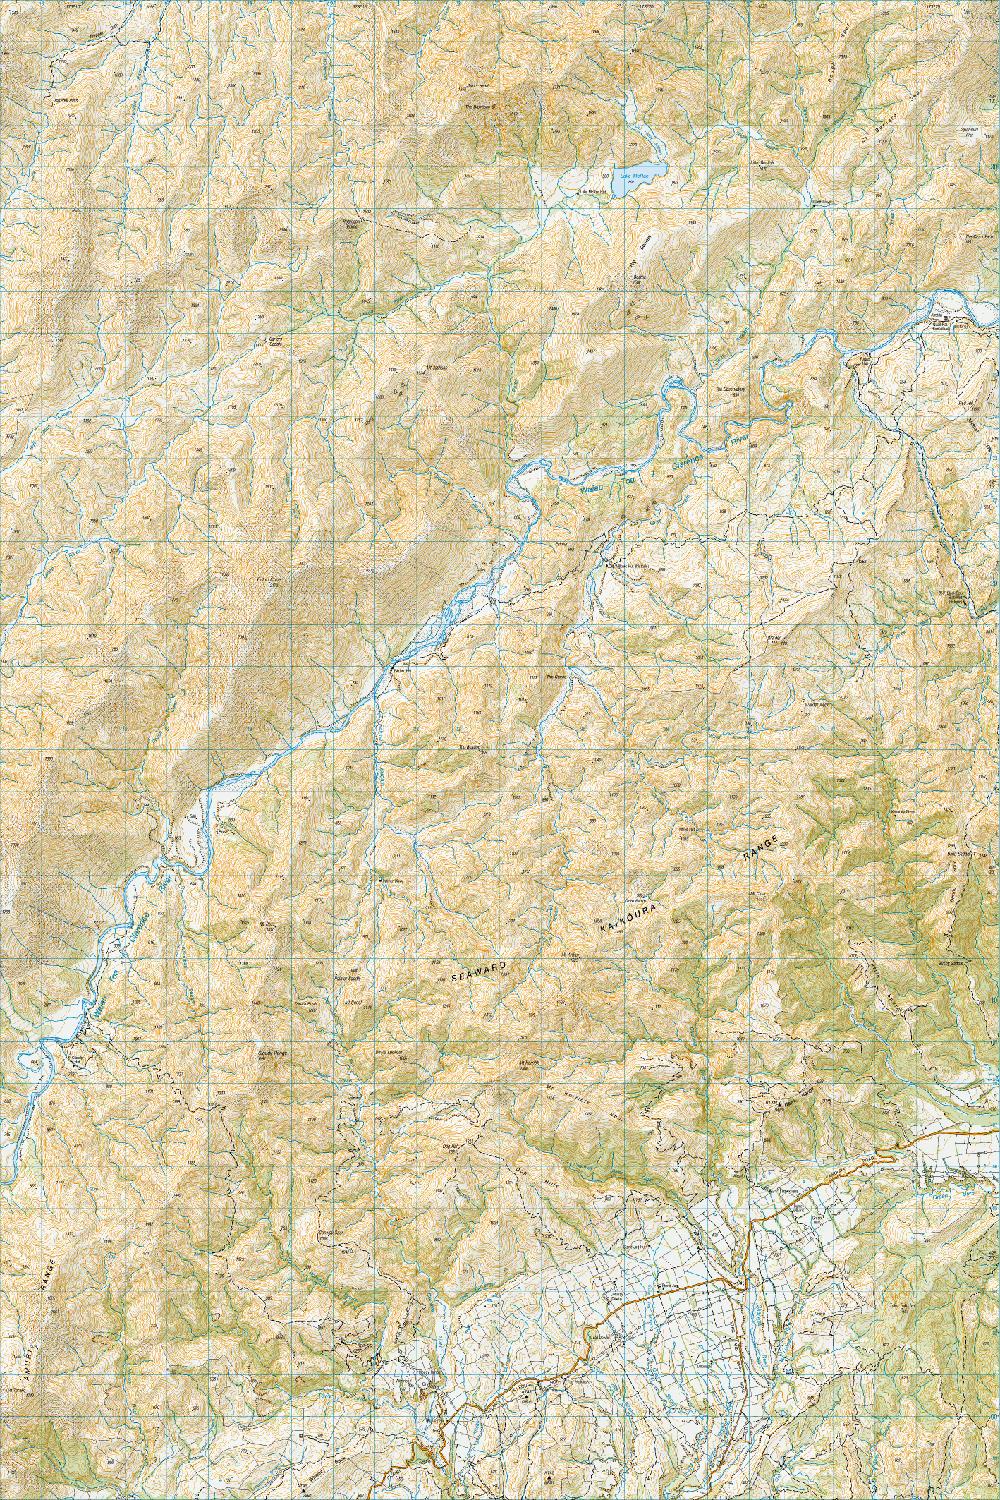 Topo map of Mount Clear